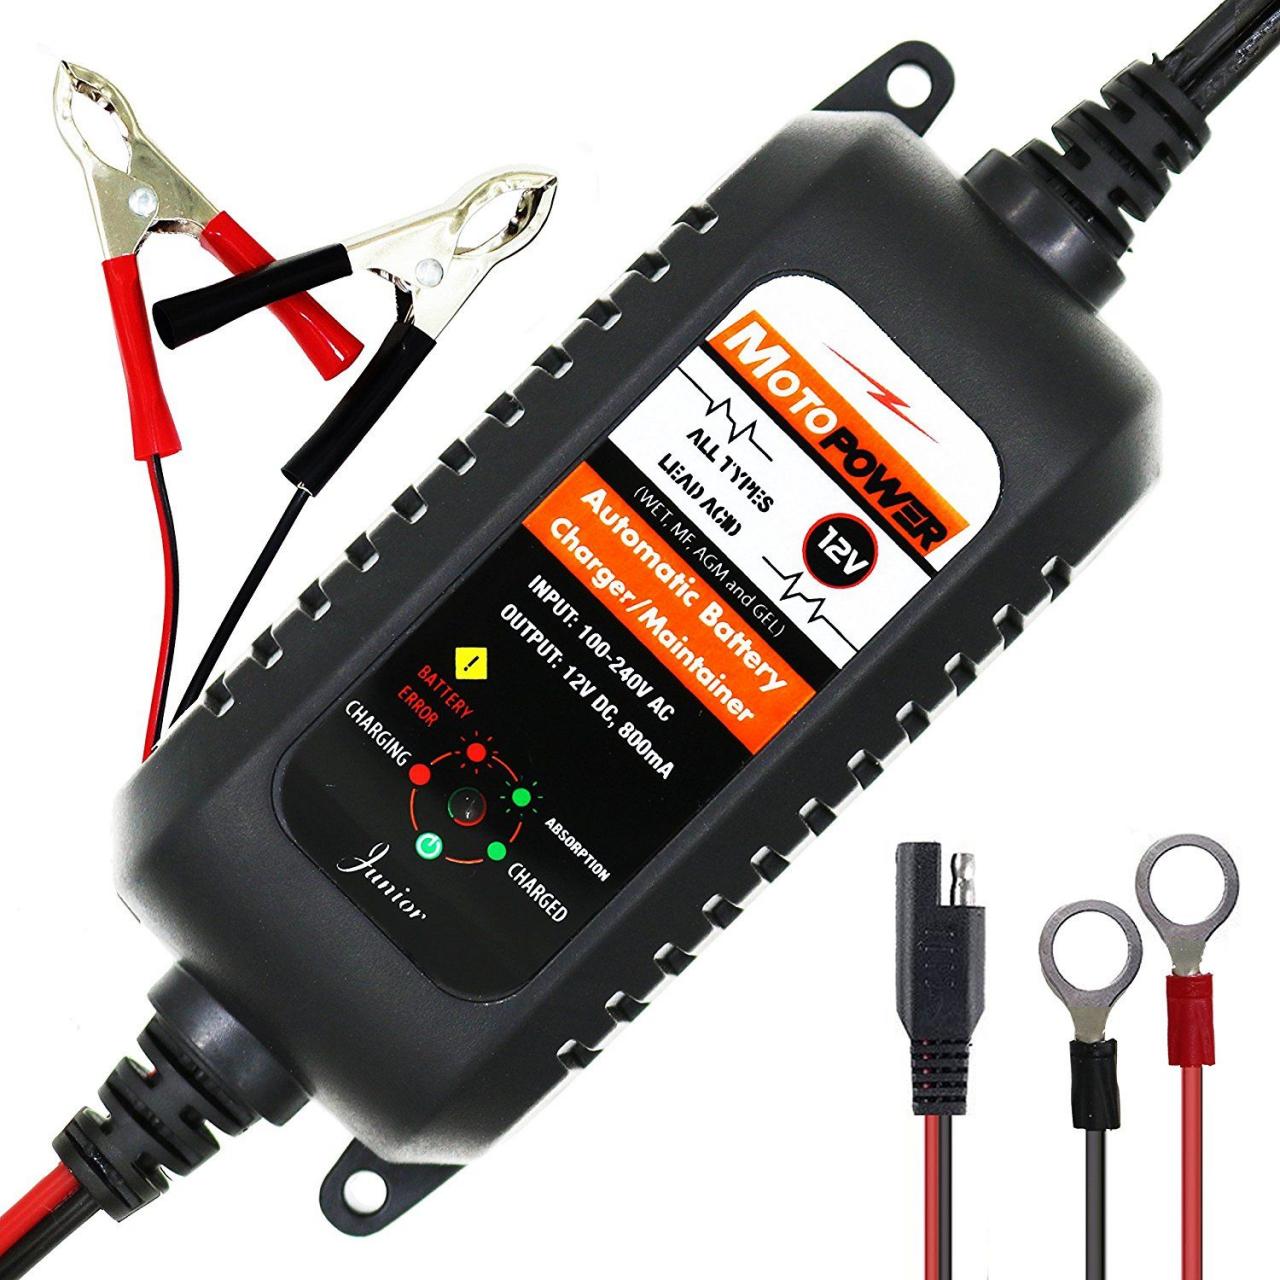 MOTOPOWER MP00205A 12V 800mA Fully Automatic Battery Charger / Maintainer  for Cars, Motorcycles, ATVs, RVs, Powersports, Boat and More.… | Voiture,  Chargeur, Bateau